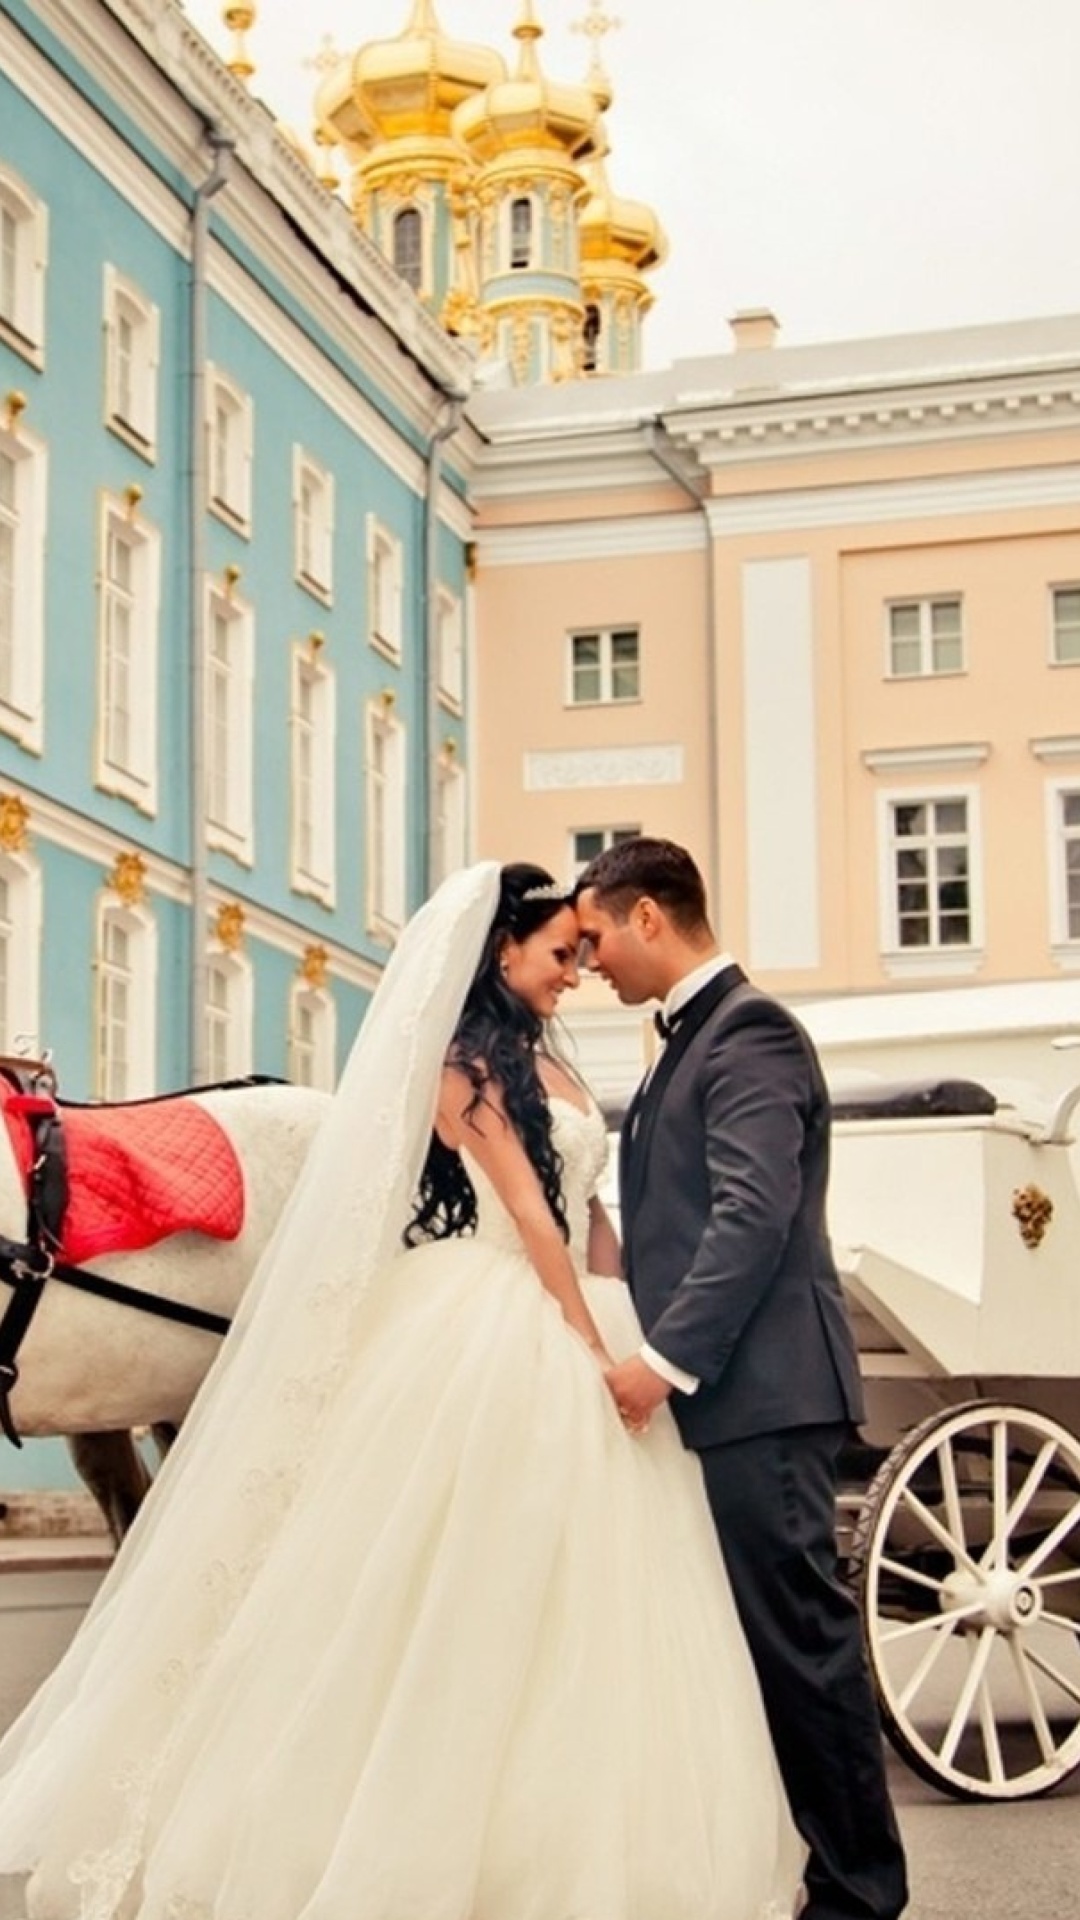 Wedding in carriage wallpaper 1080x1920